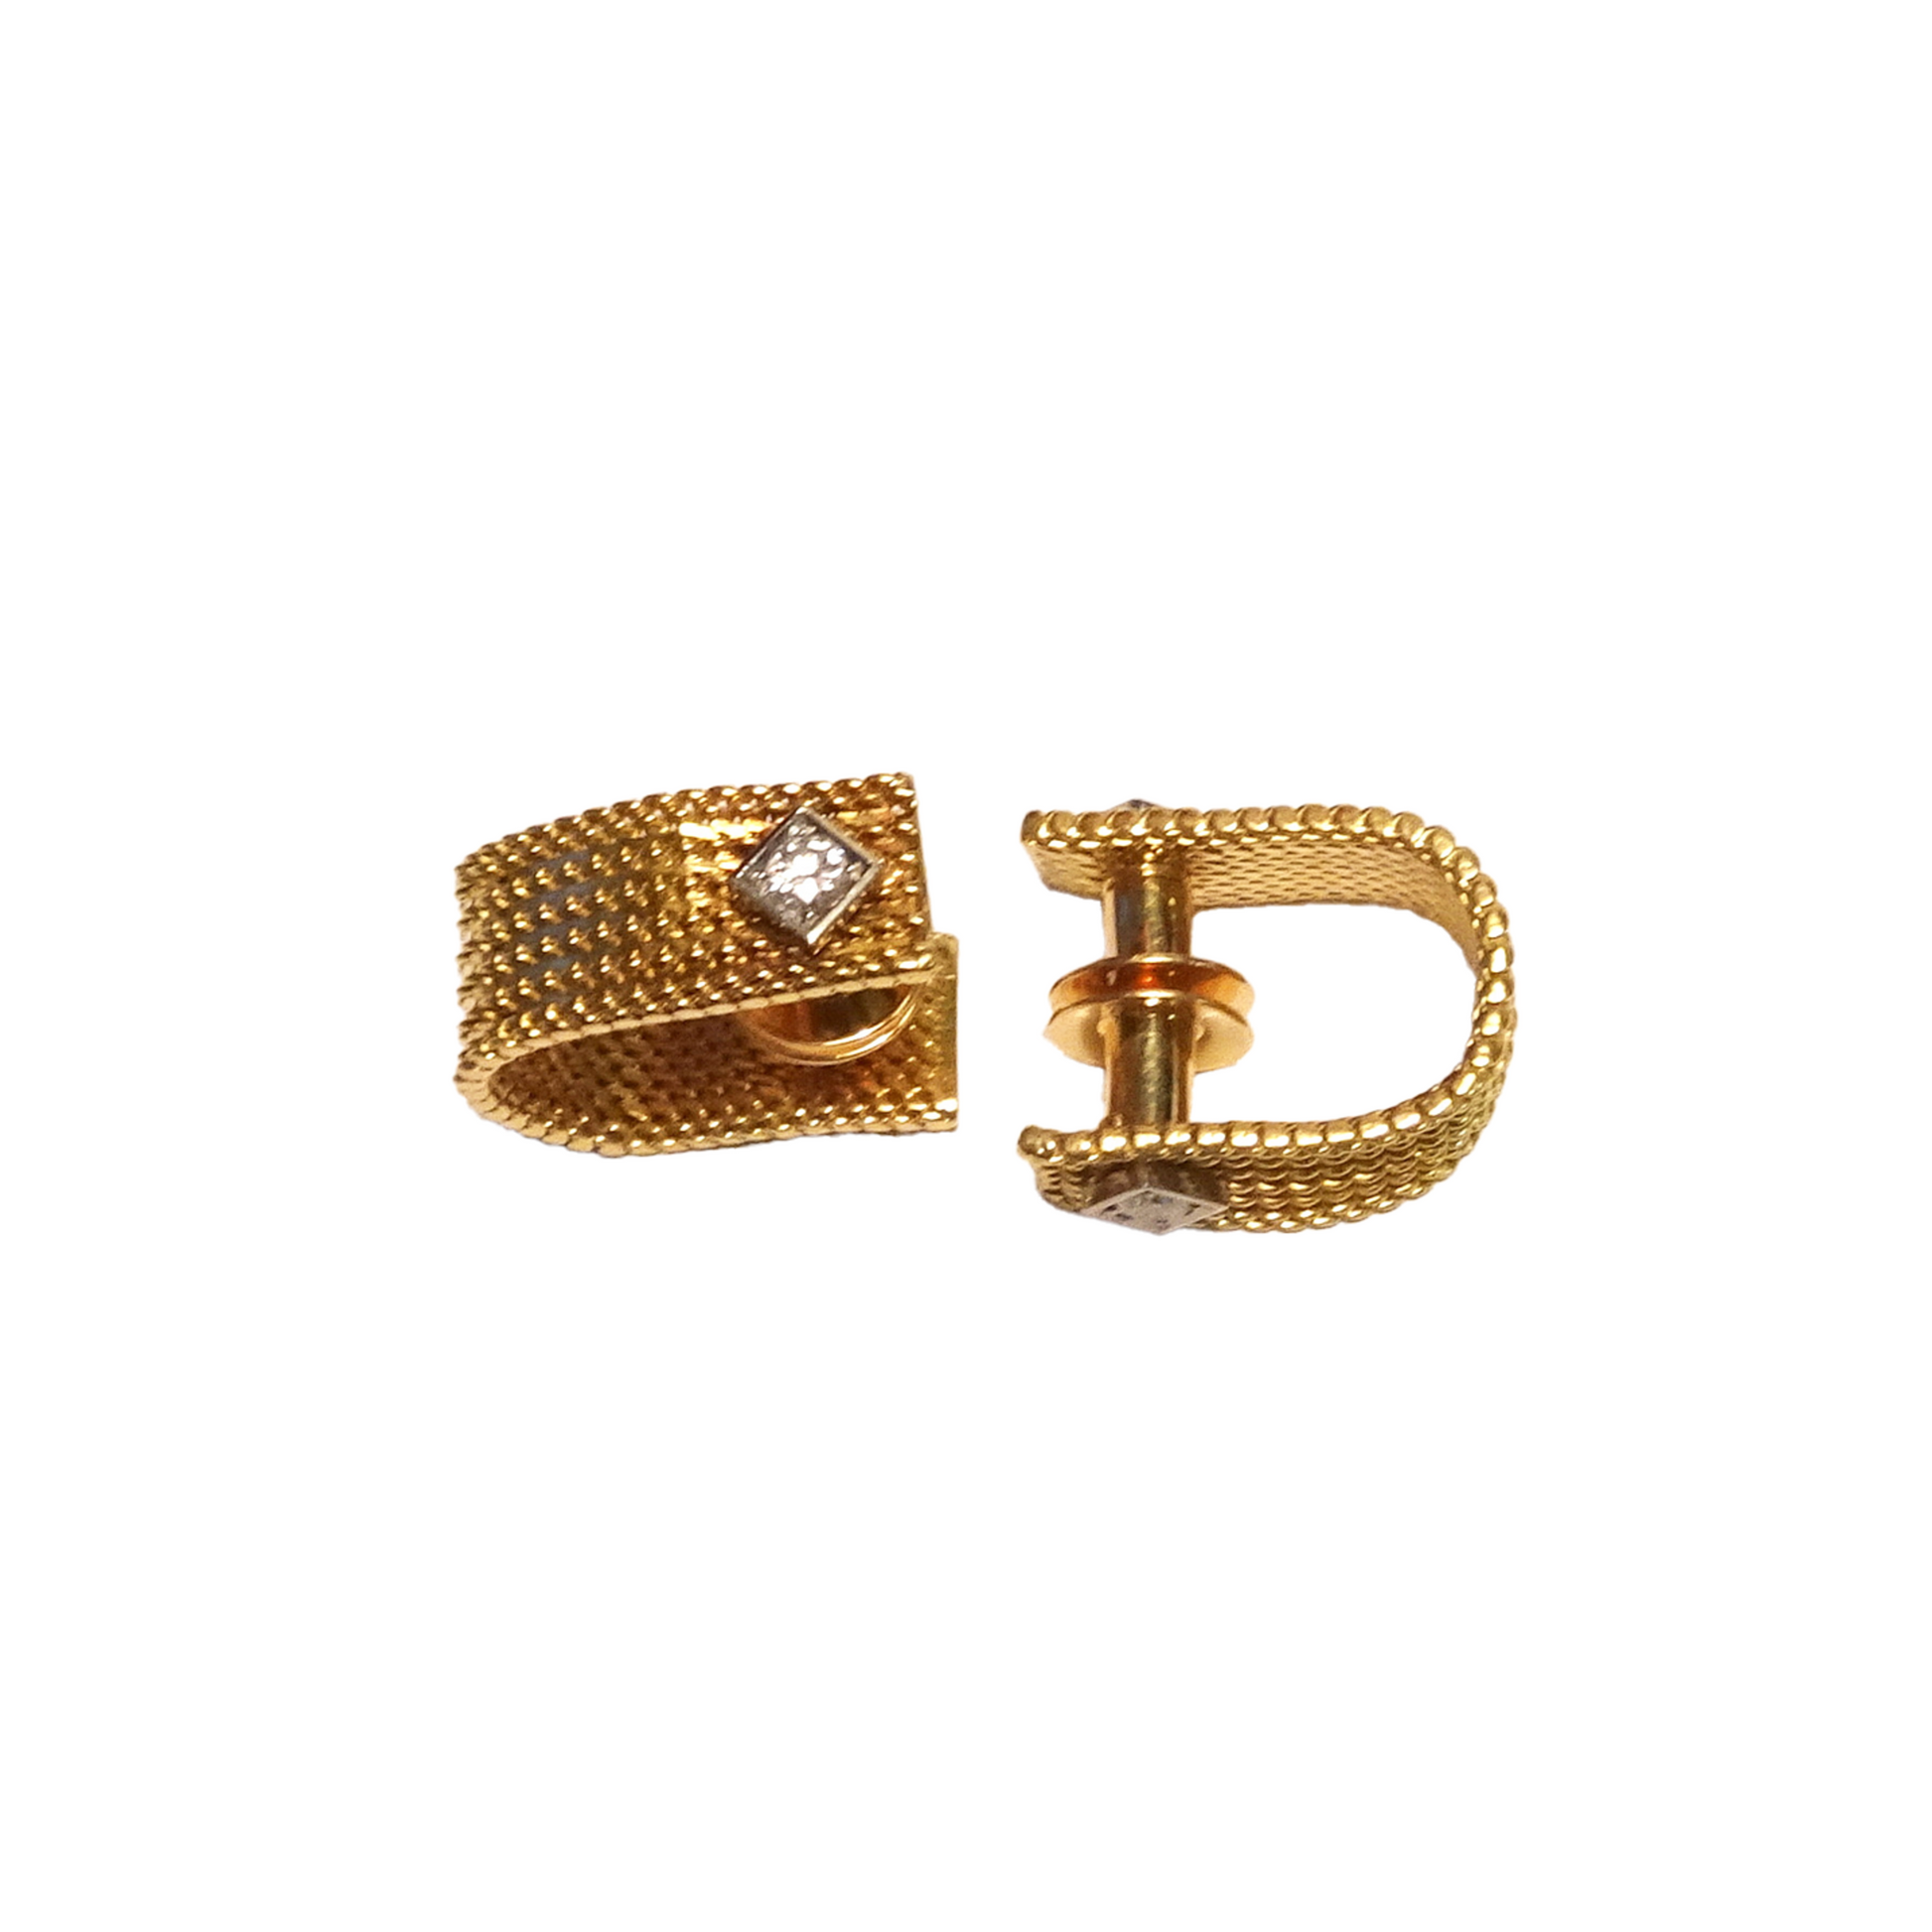 1960s 18KT Yellow Gold Diamond Cufflinks front and side